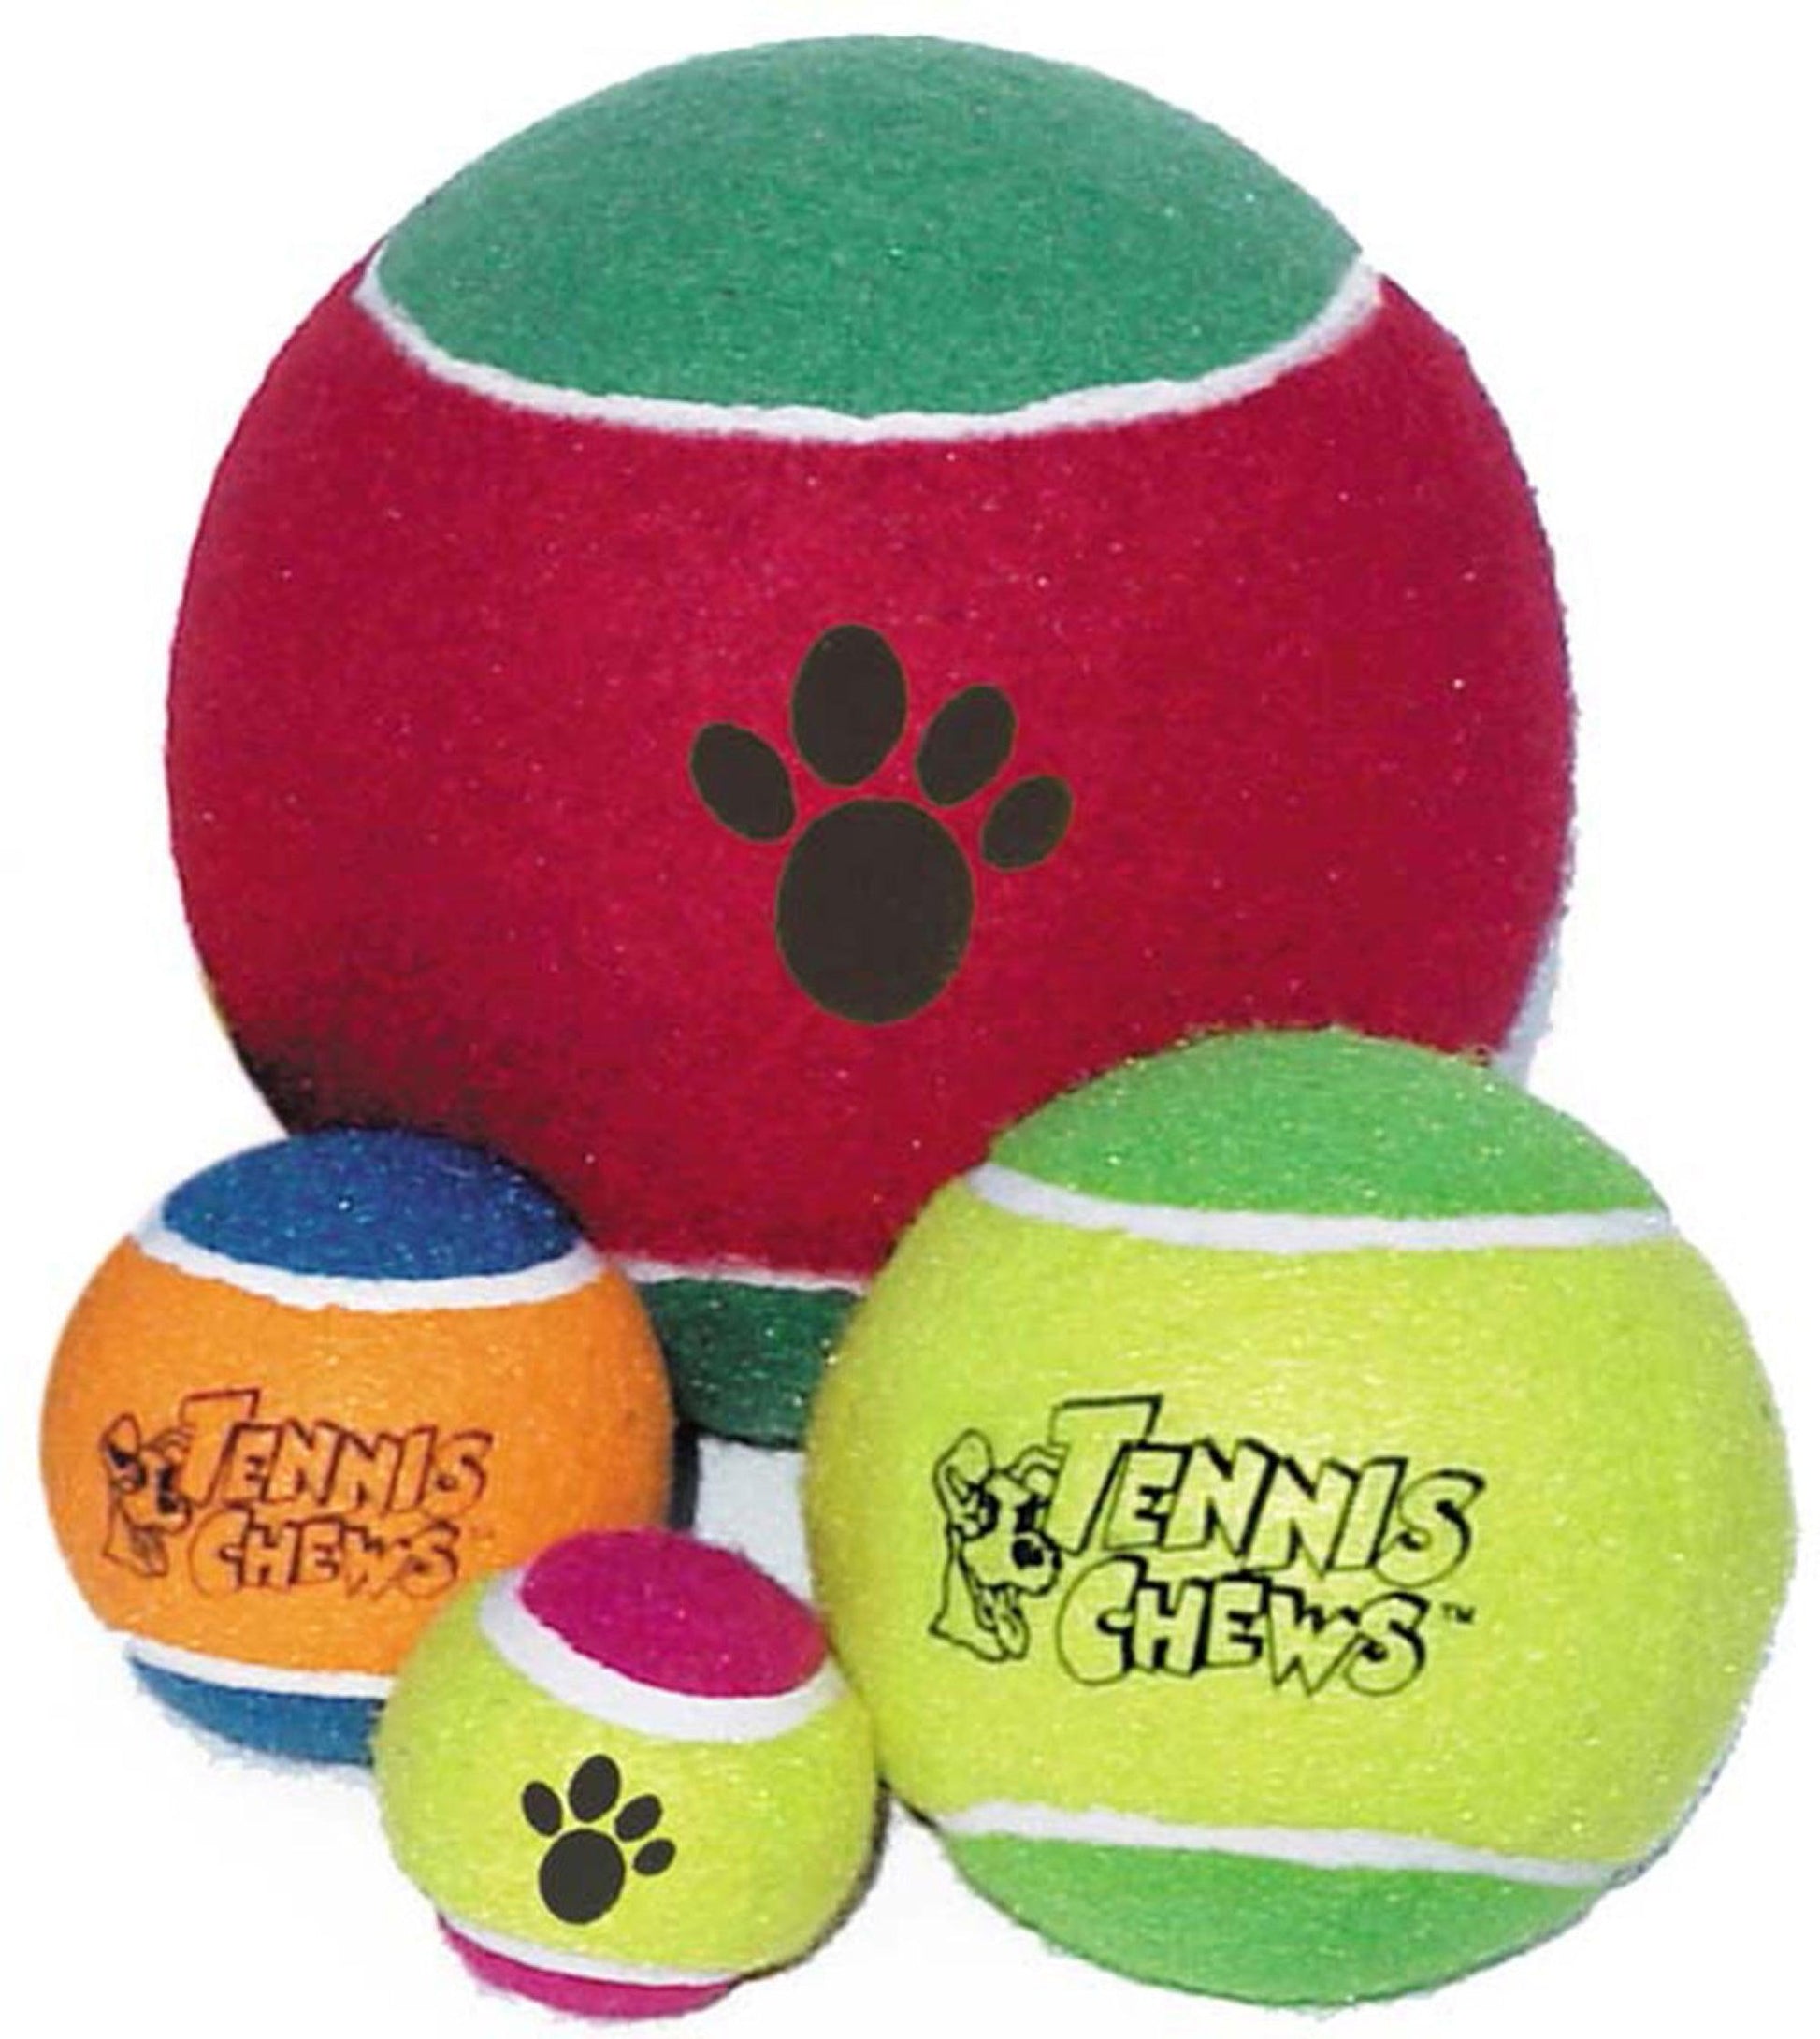 Mammoth Pet Products Tennis Ball Dog Toy Assorted Extra-Large 6 in